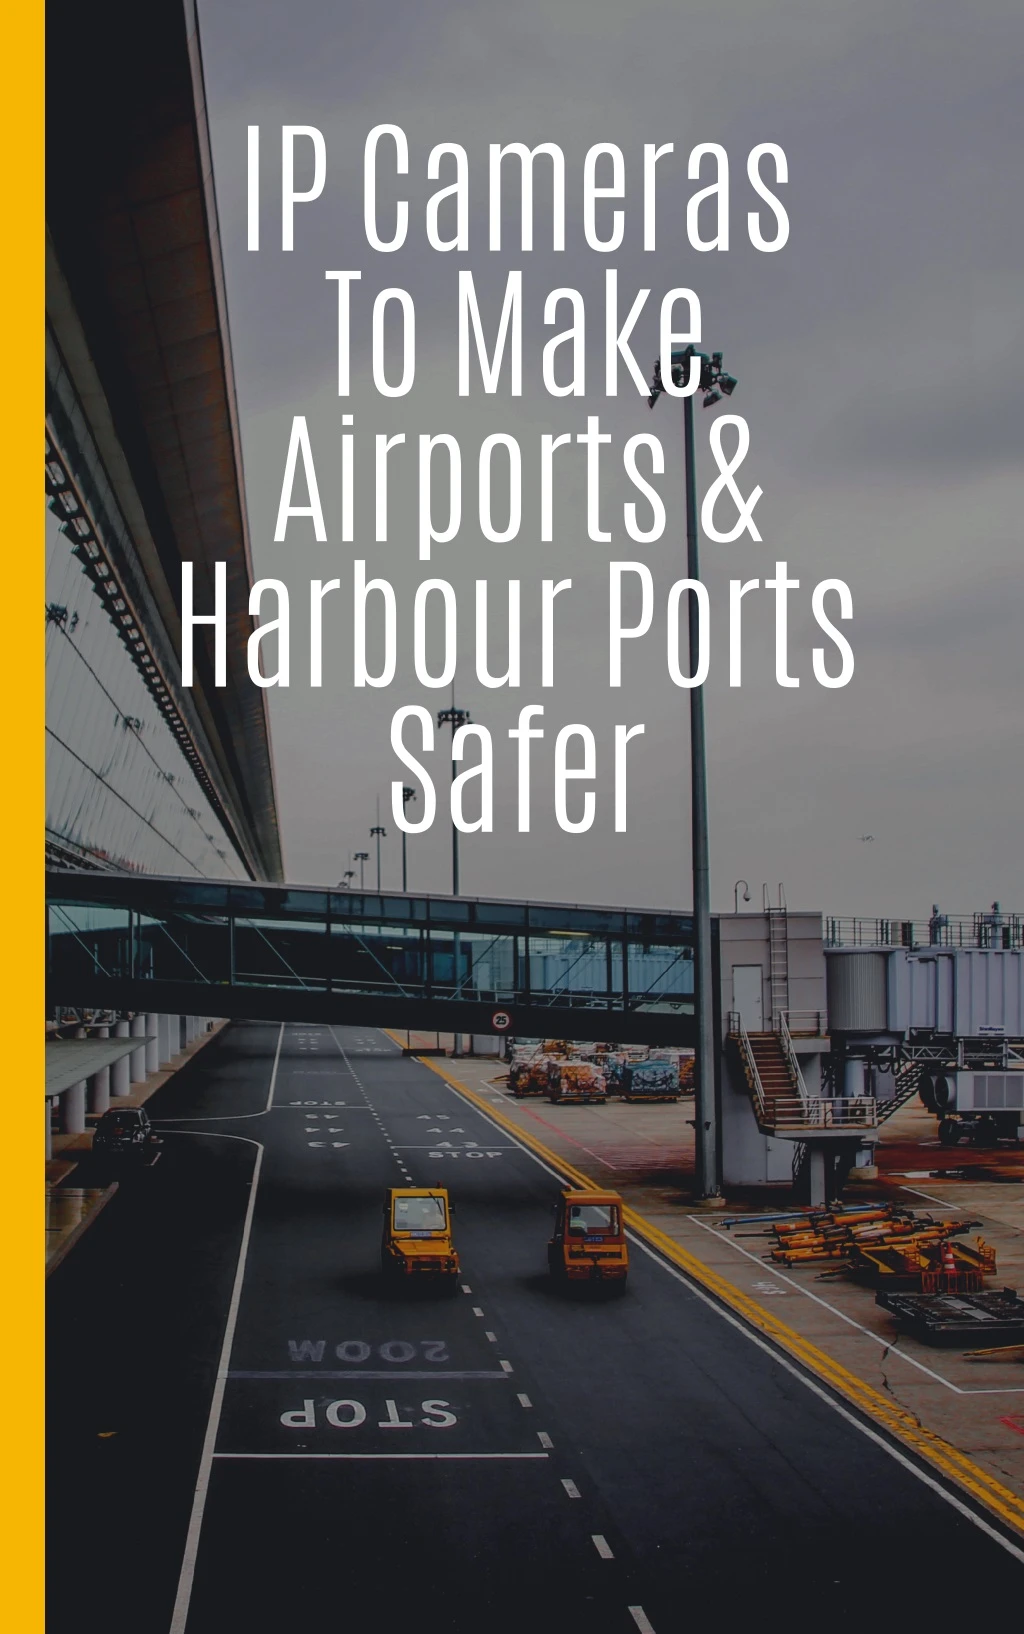 ip cameras to make airports harbour ports safer